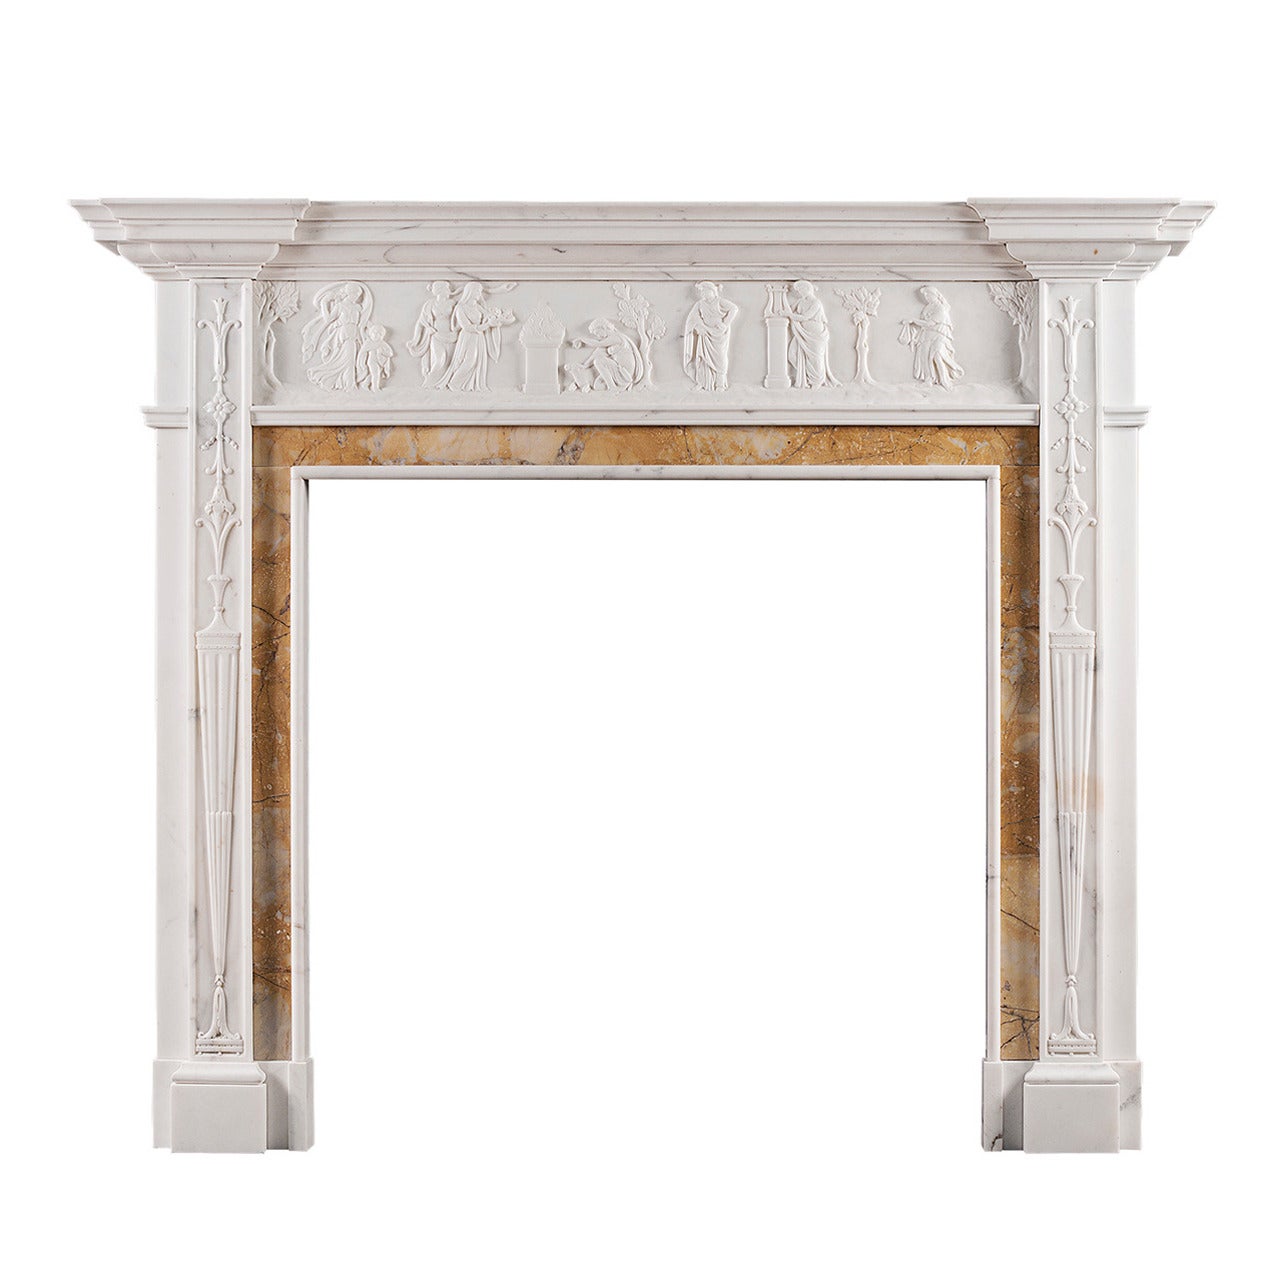 Neoclassical English Statuary Marble Fireplace Mantel with Siena Inlay For Sale